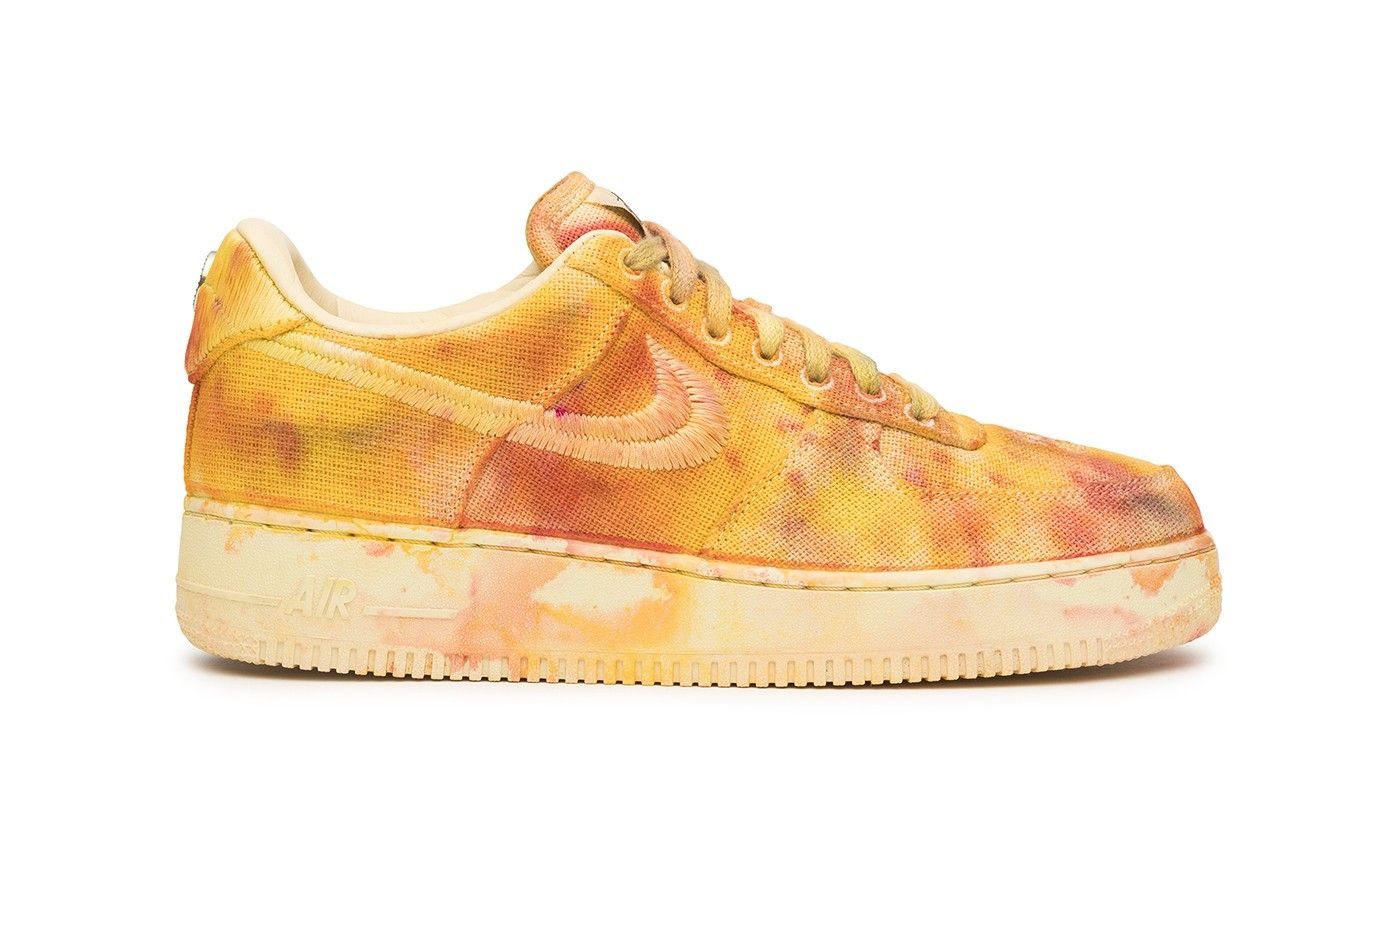 How to Bleach and Dye the Stussy x Nike - Air Force 1s (Tutorial) 